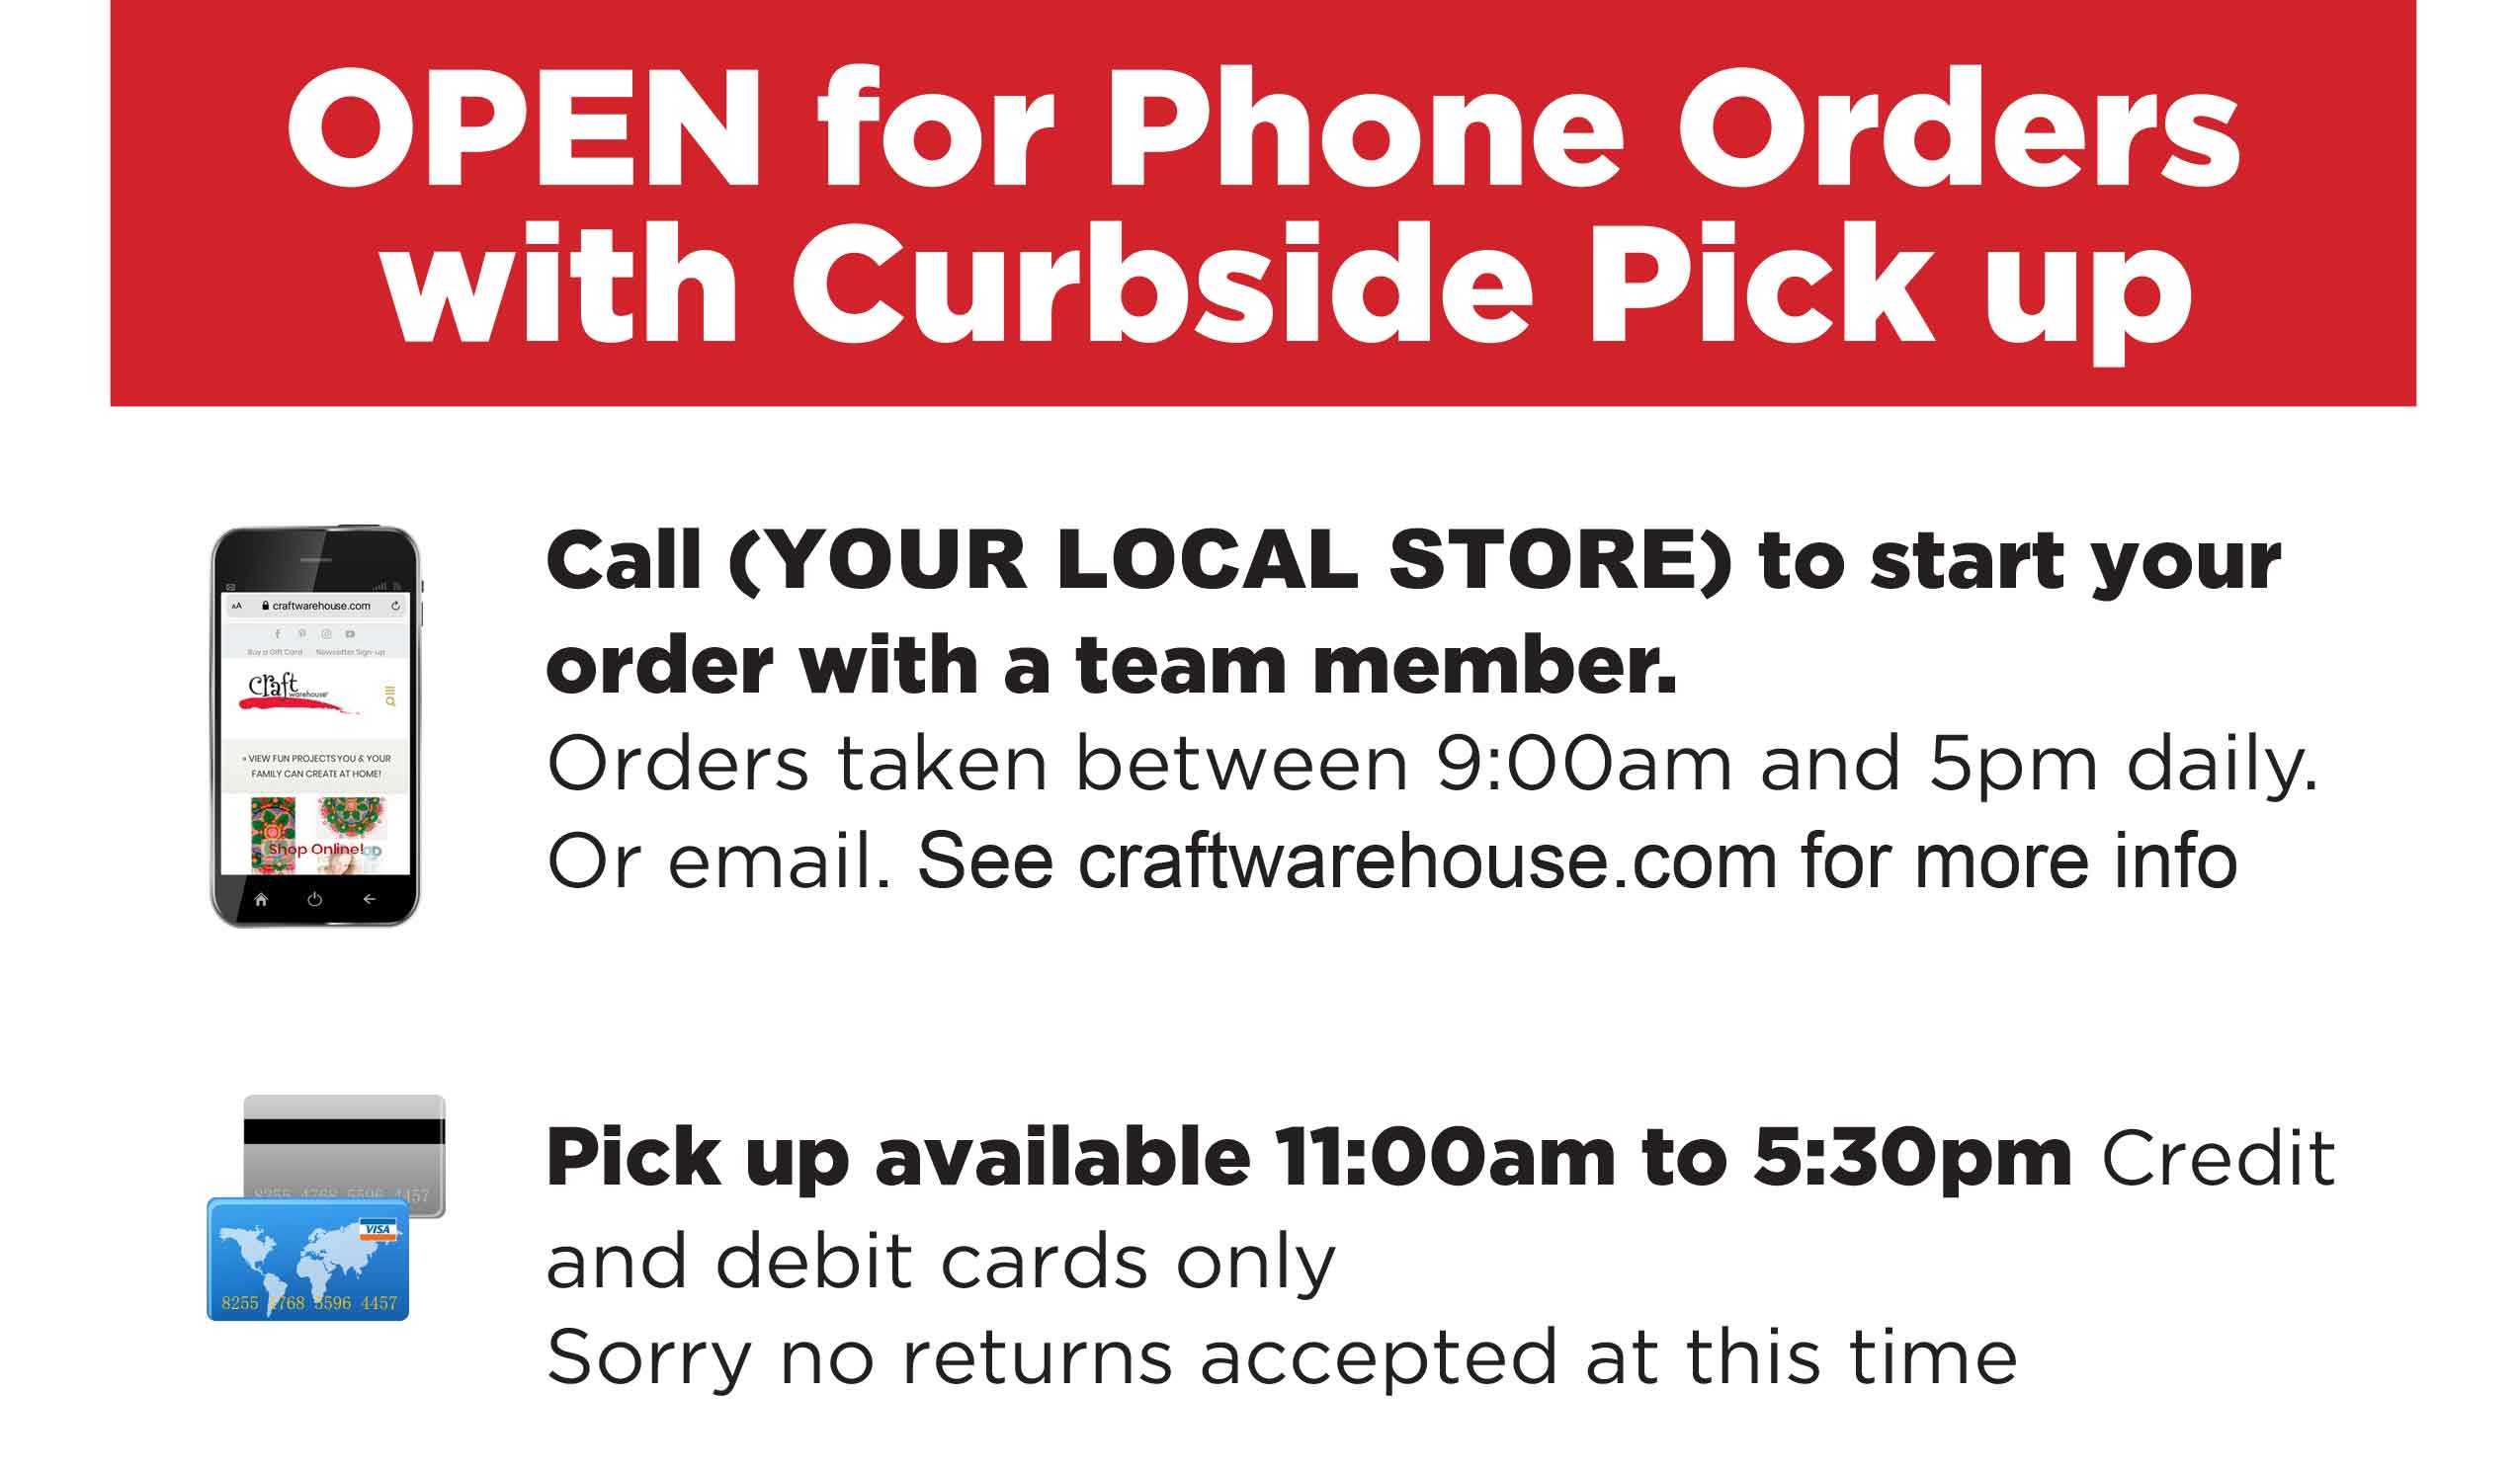 OPEN for Phone Orders with Curbside Pick-Up